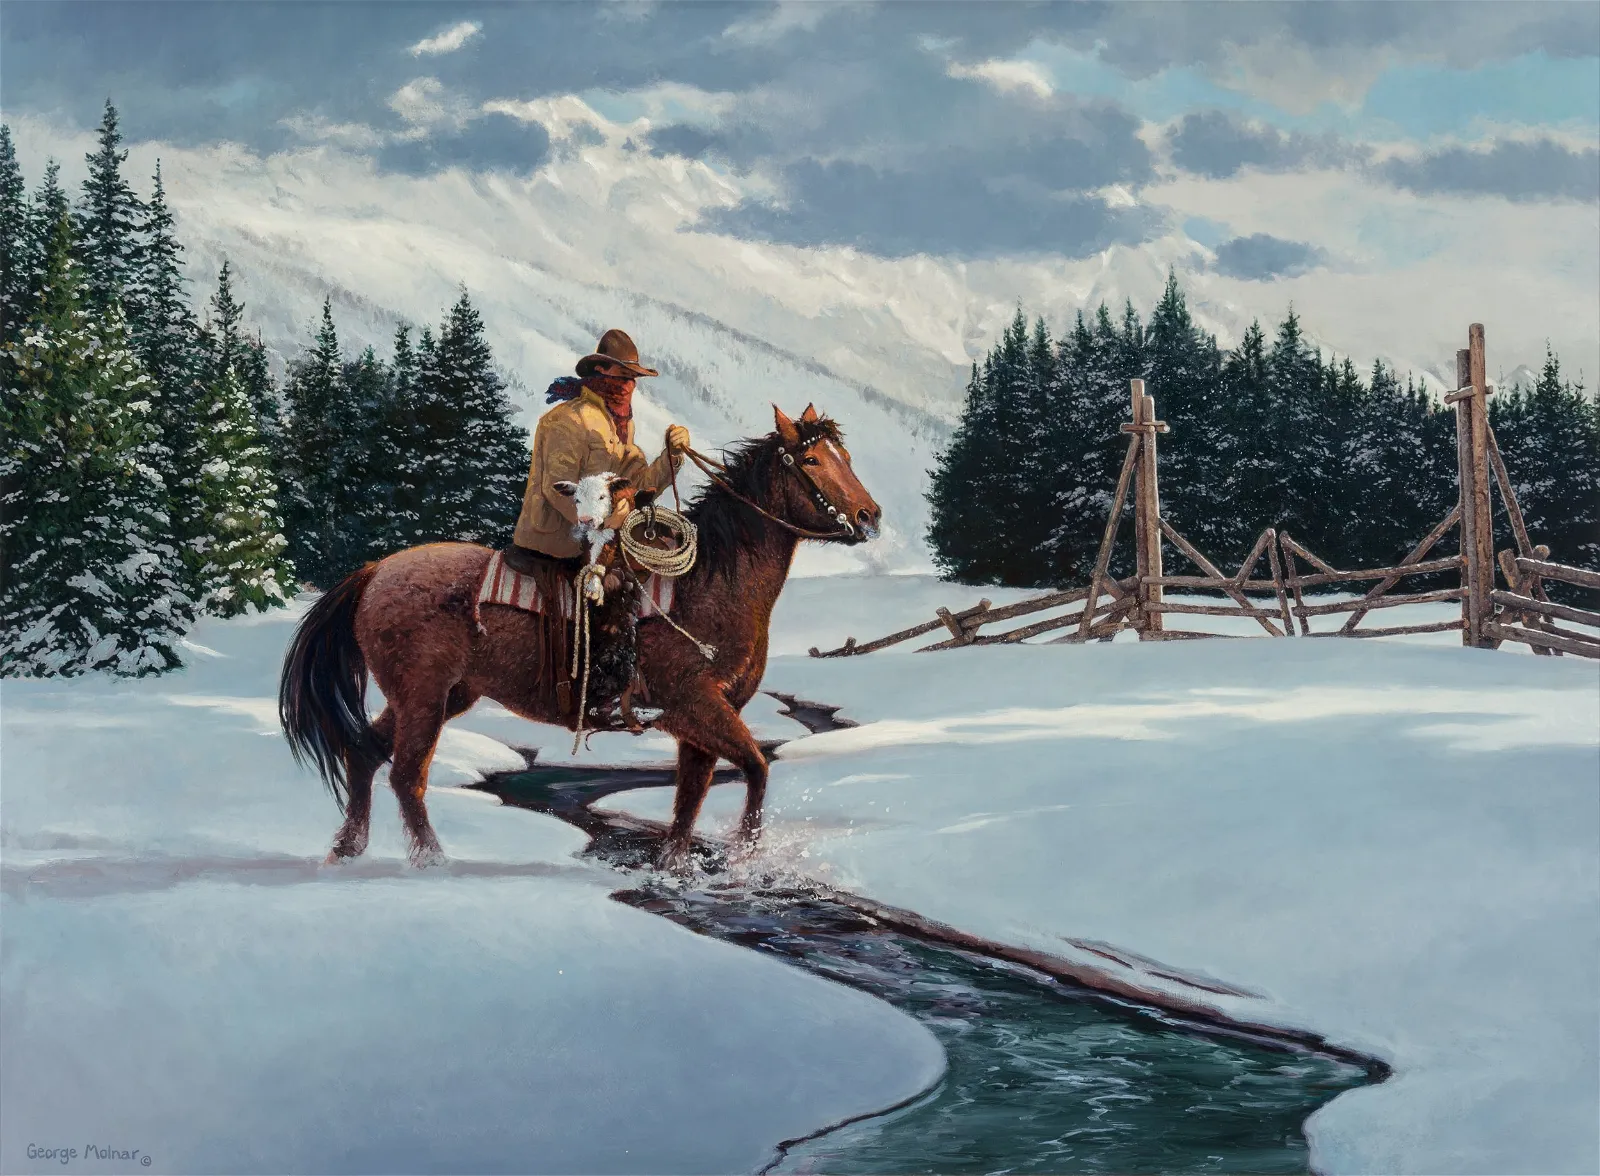 George Molnar – Cowboy on Horse in Winter